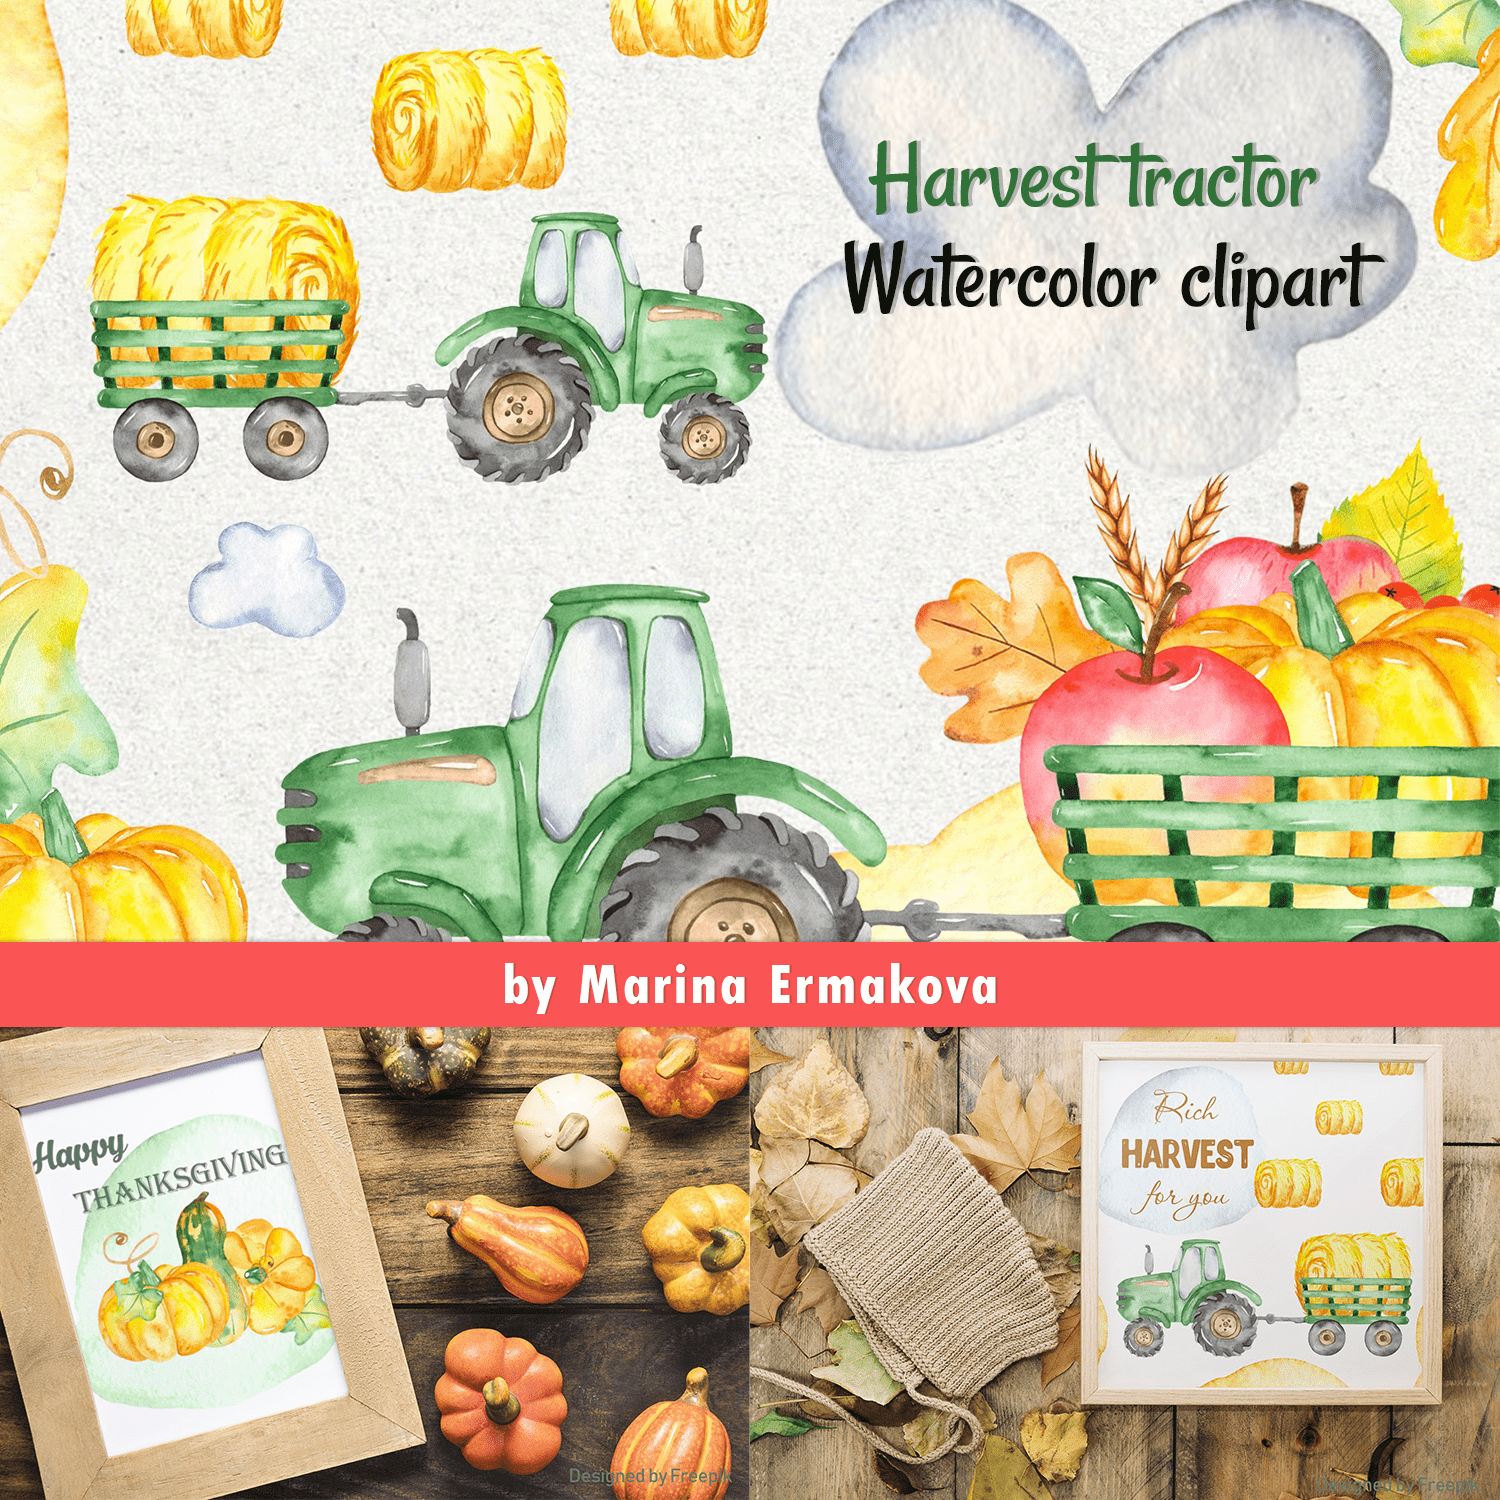 Harvest tractor Watercolor clipart.